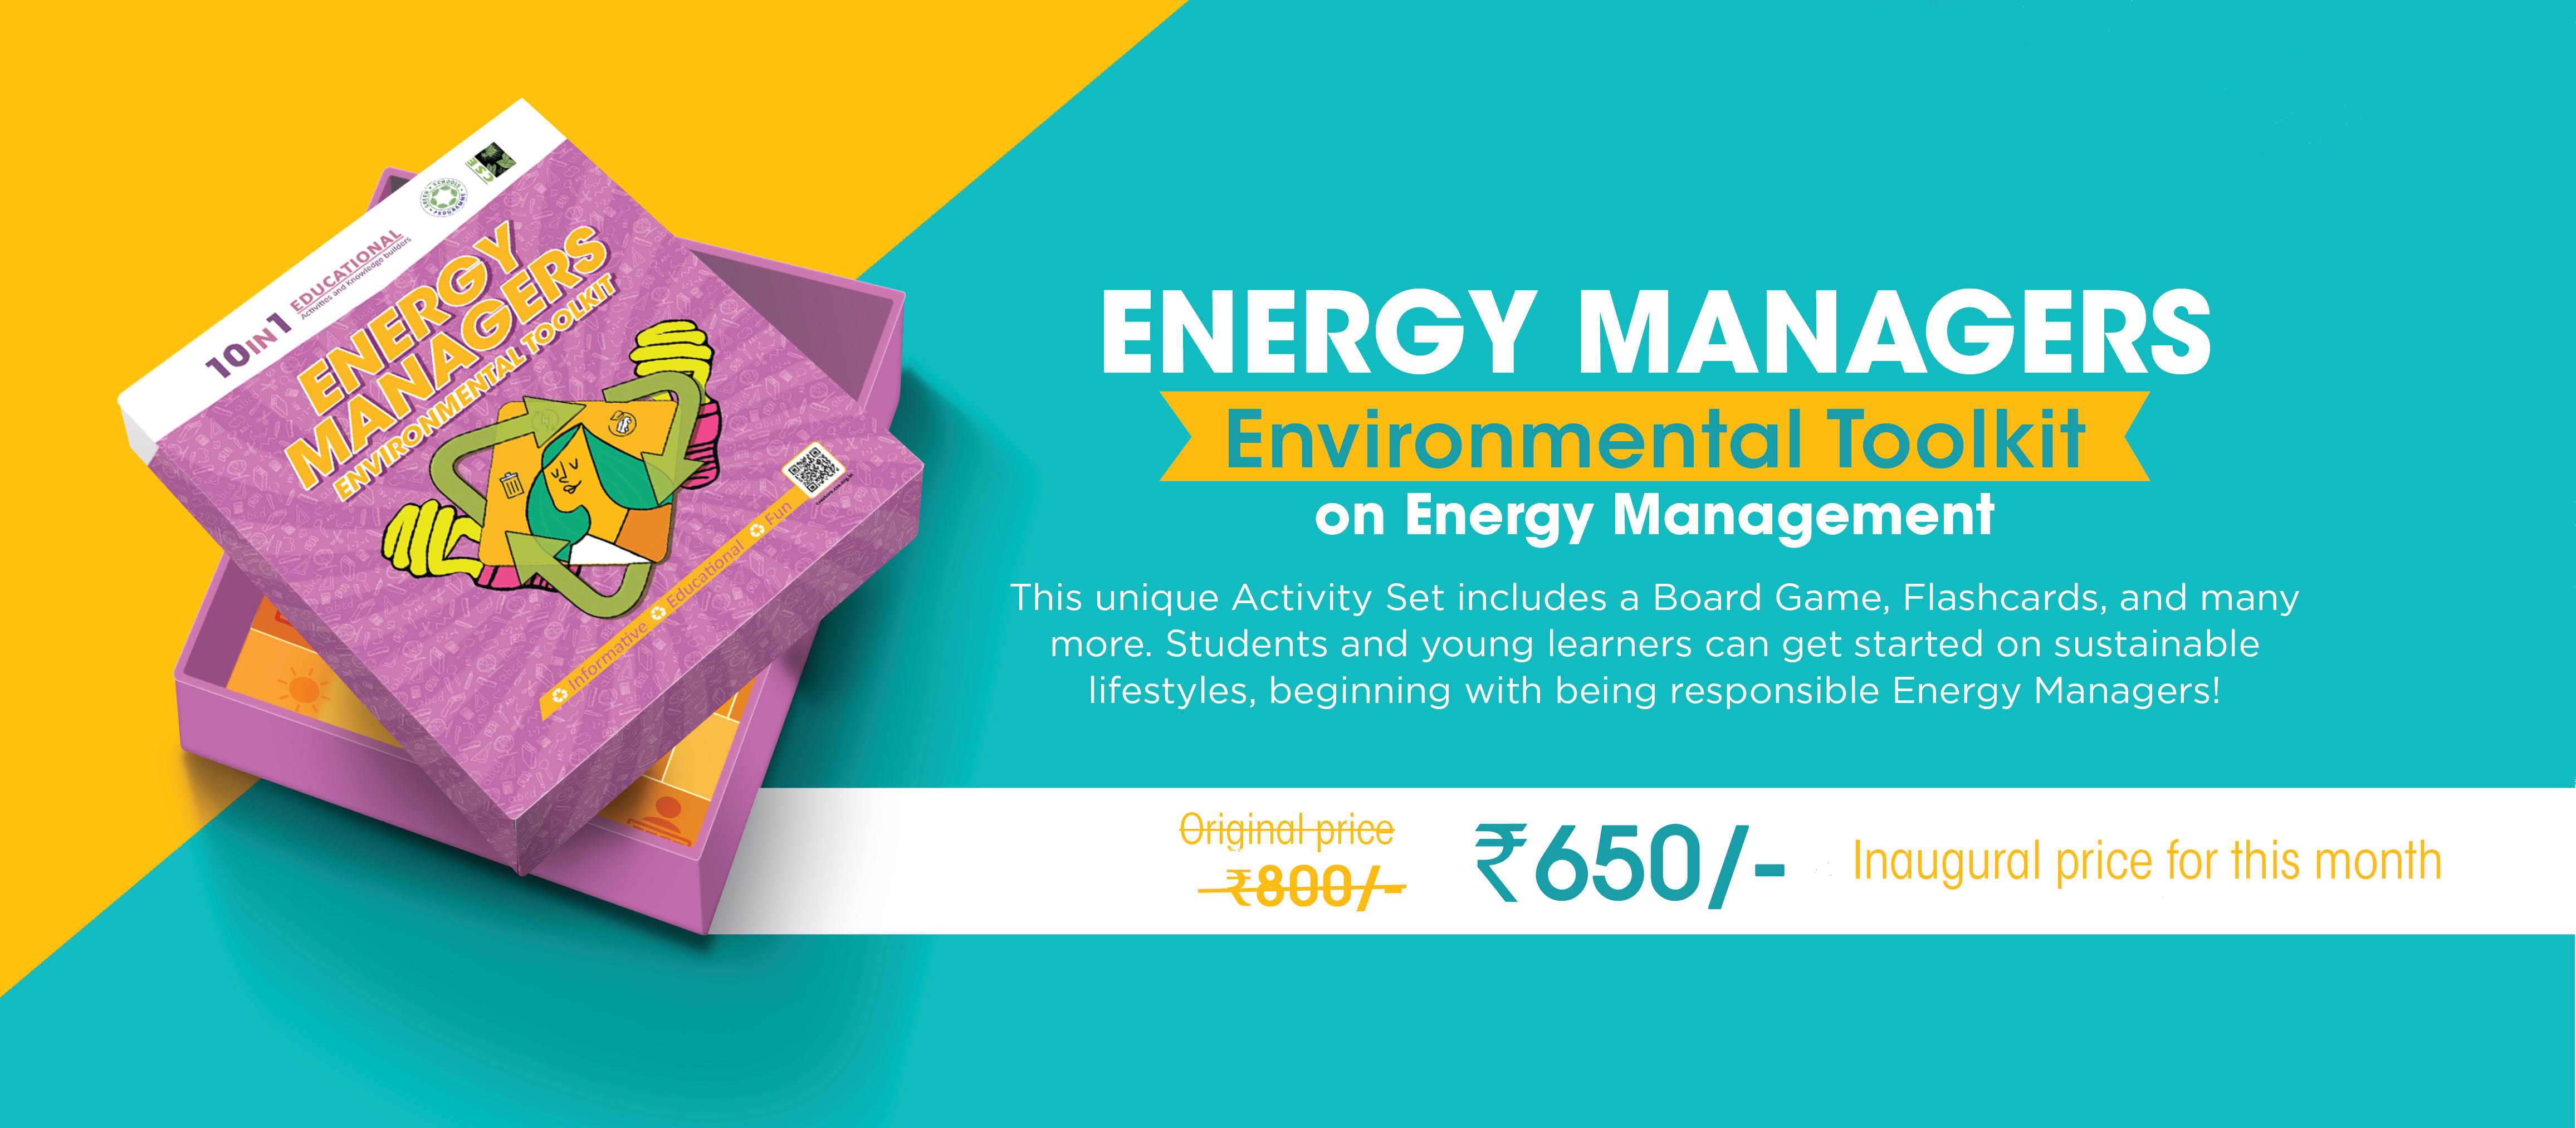 ENERGY MANAGERS: ENVIRONMENTAL TOOLKIT ON RENEWABLE ENERGY